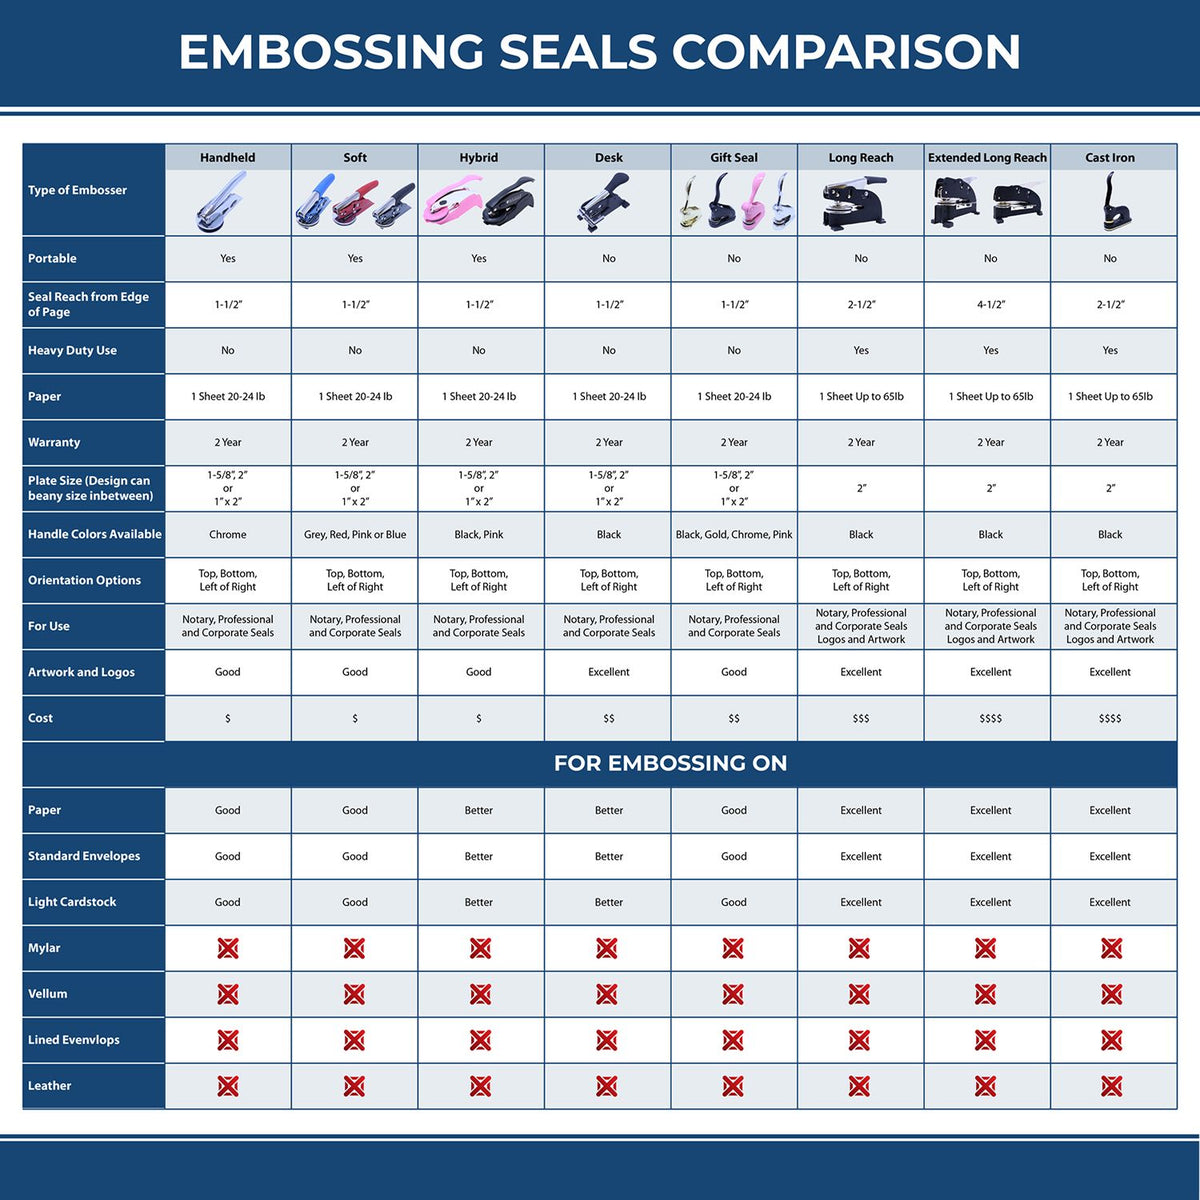 A comparison chart for the different types of mount models available for the Hybrid Hawaii Geologist Seal